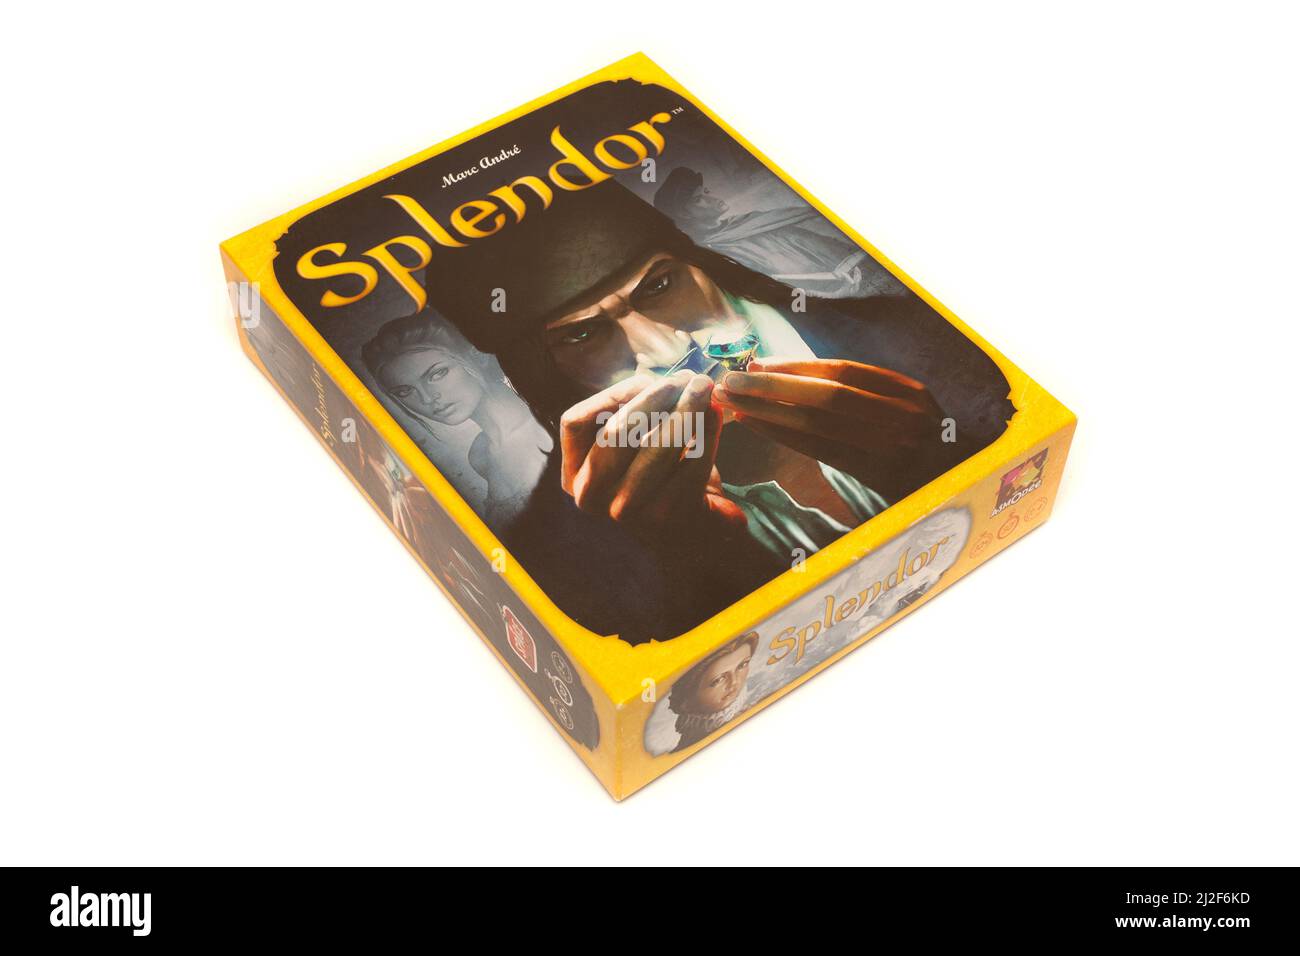 The board game Splendor by Marc Andre Stock Photo